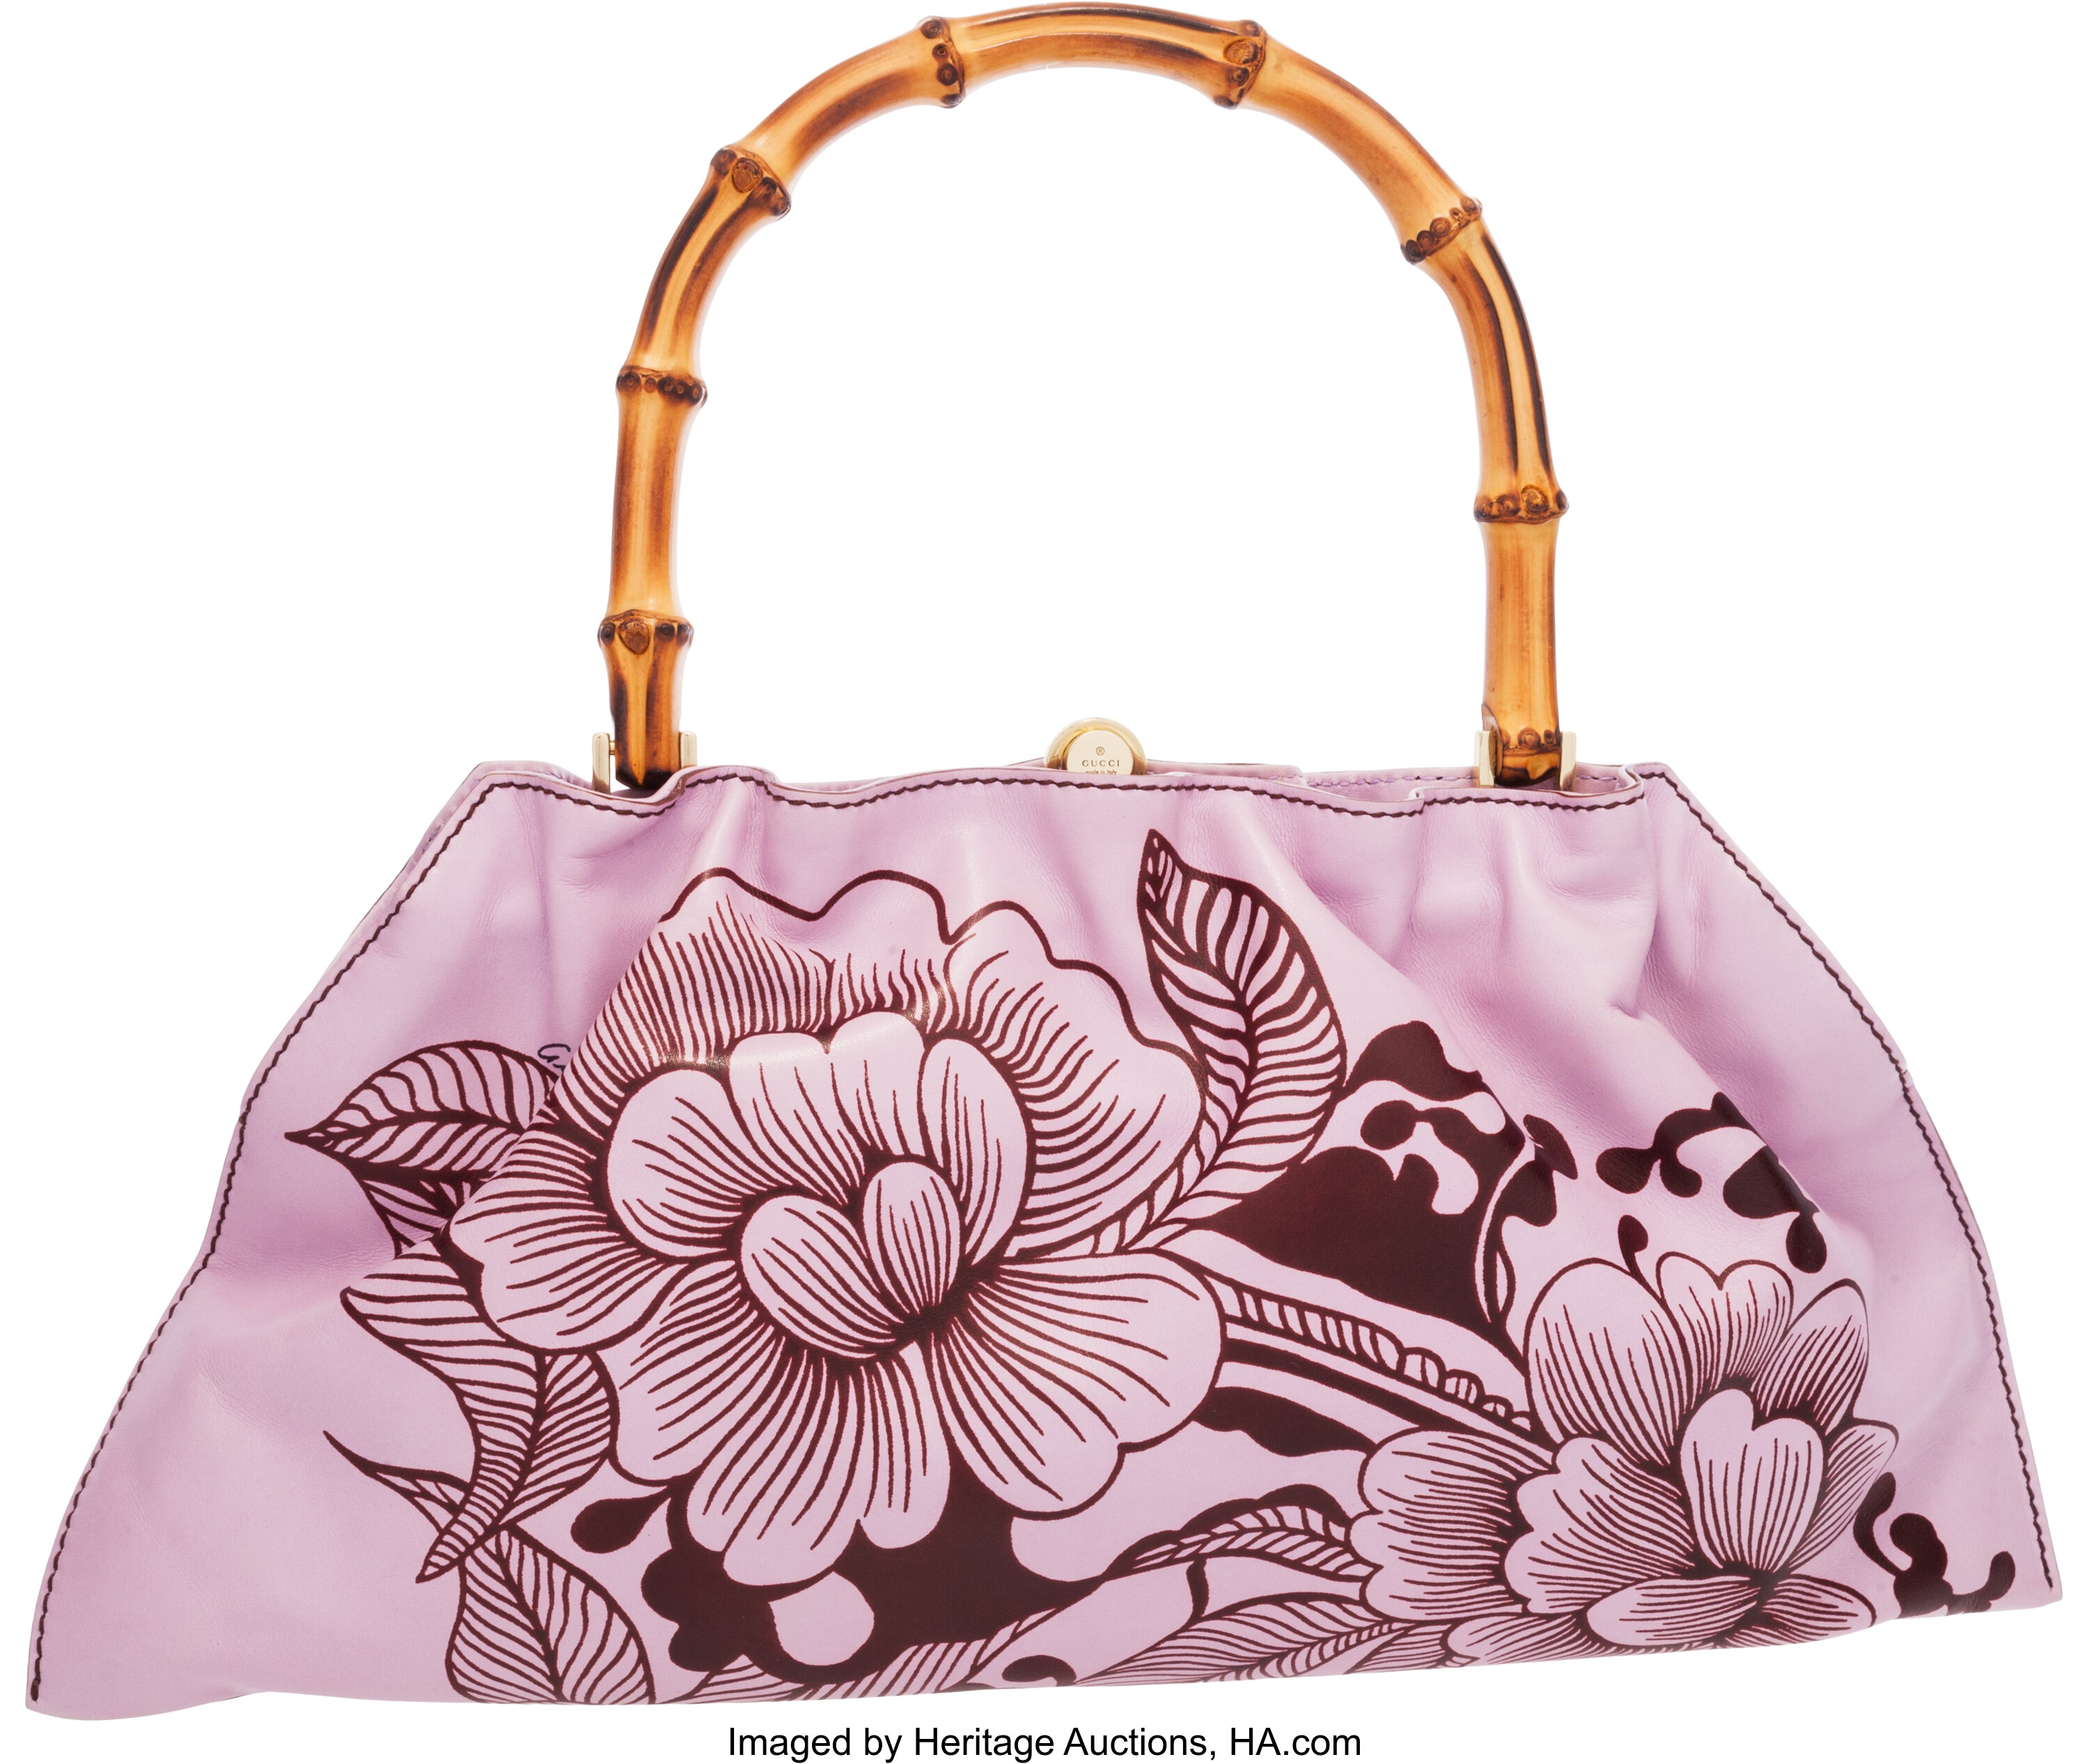 Gucci Floral-Embroidered Small Dionysus with Bamboo Handle in Pink